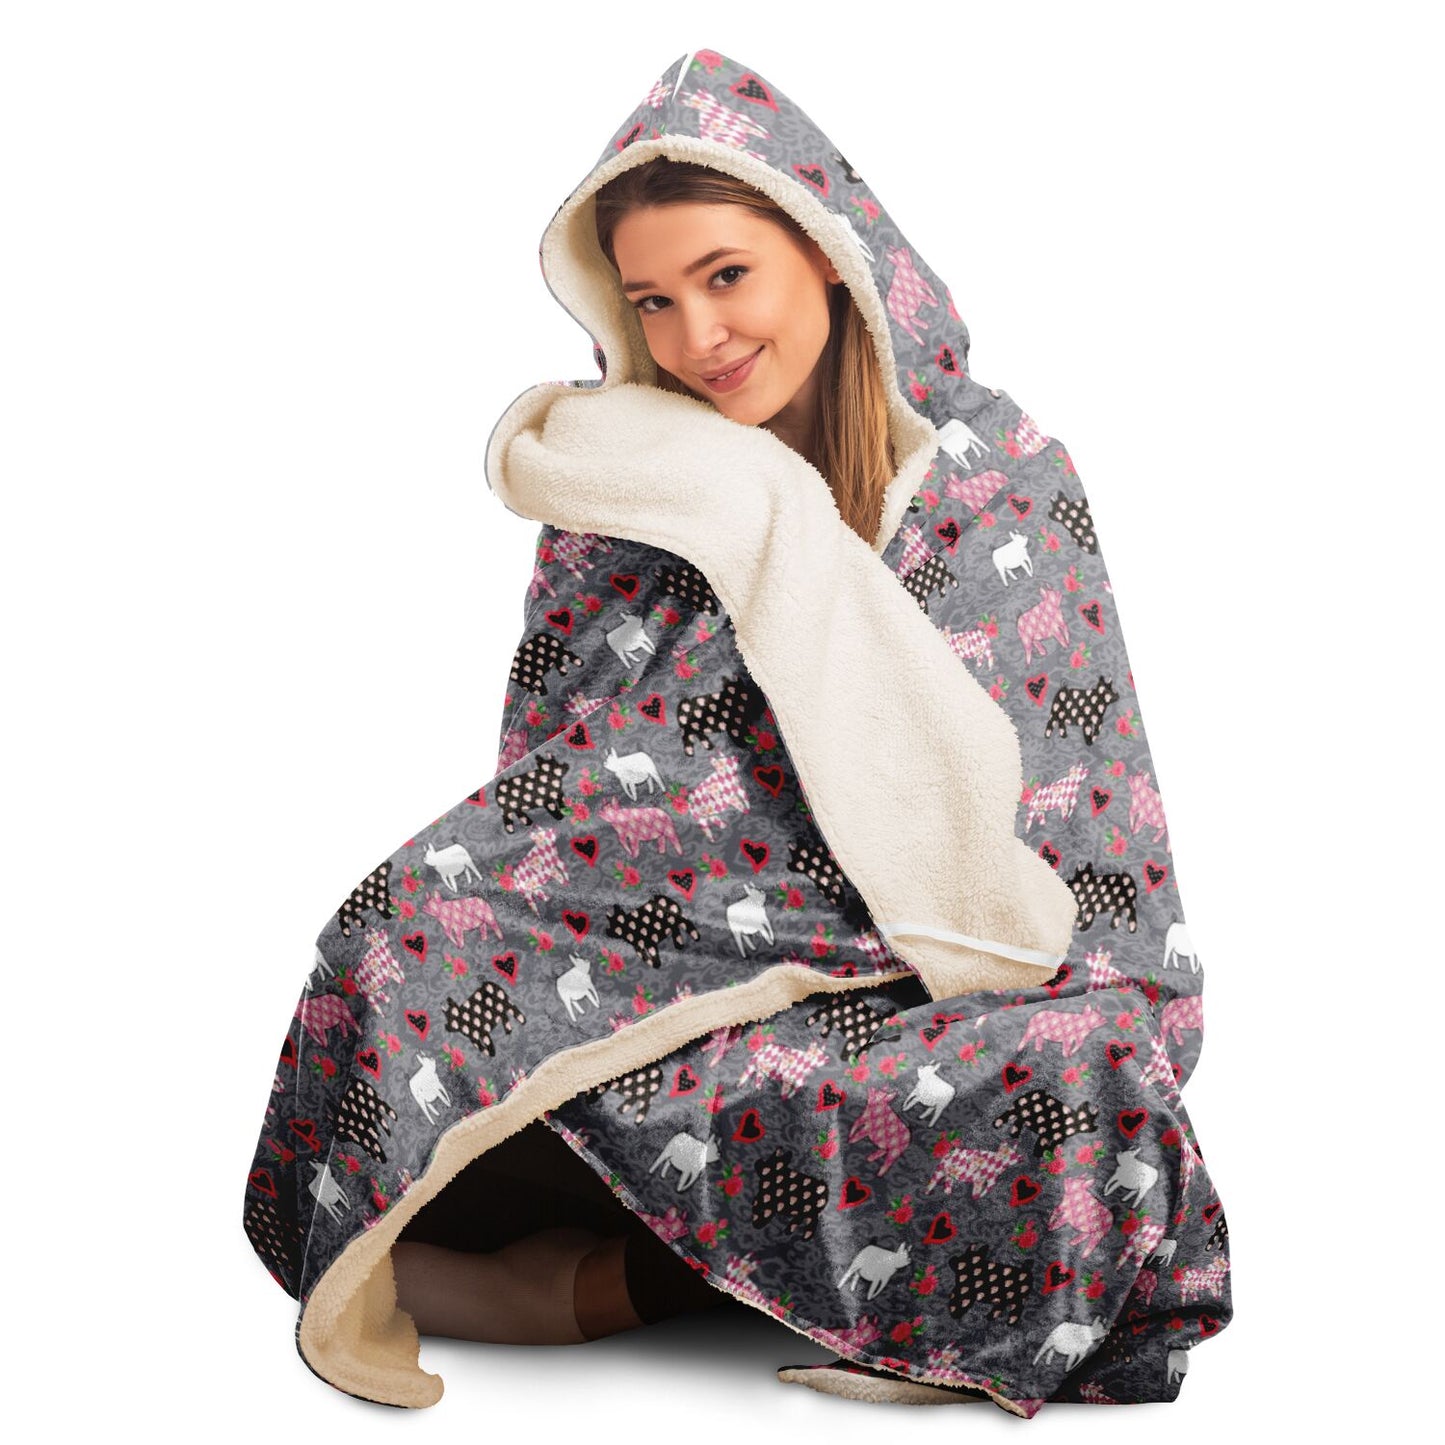 Cute Livestock Show Pigs with Hearts Hooded Blanket -All Over Print Hooded Throw